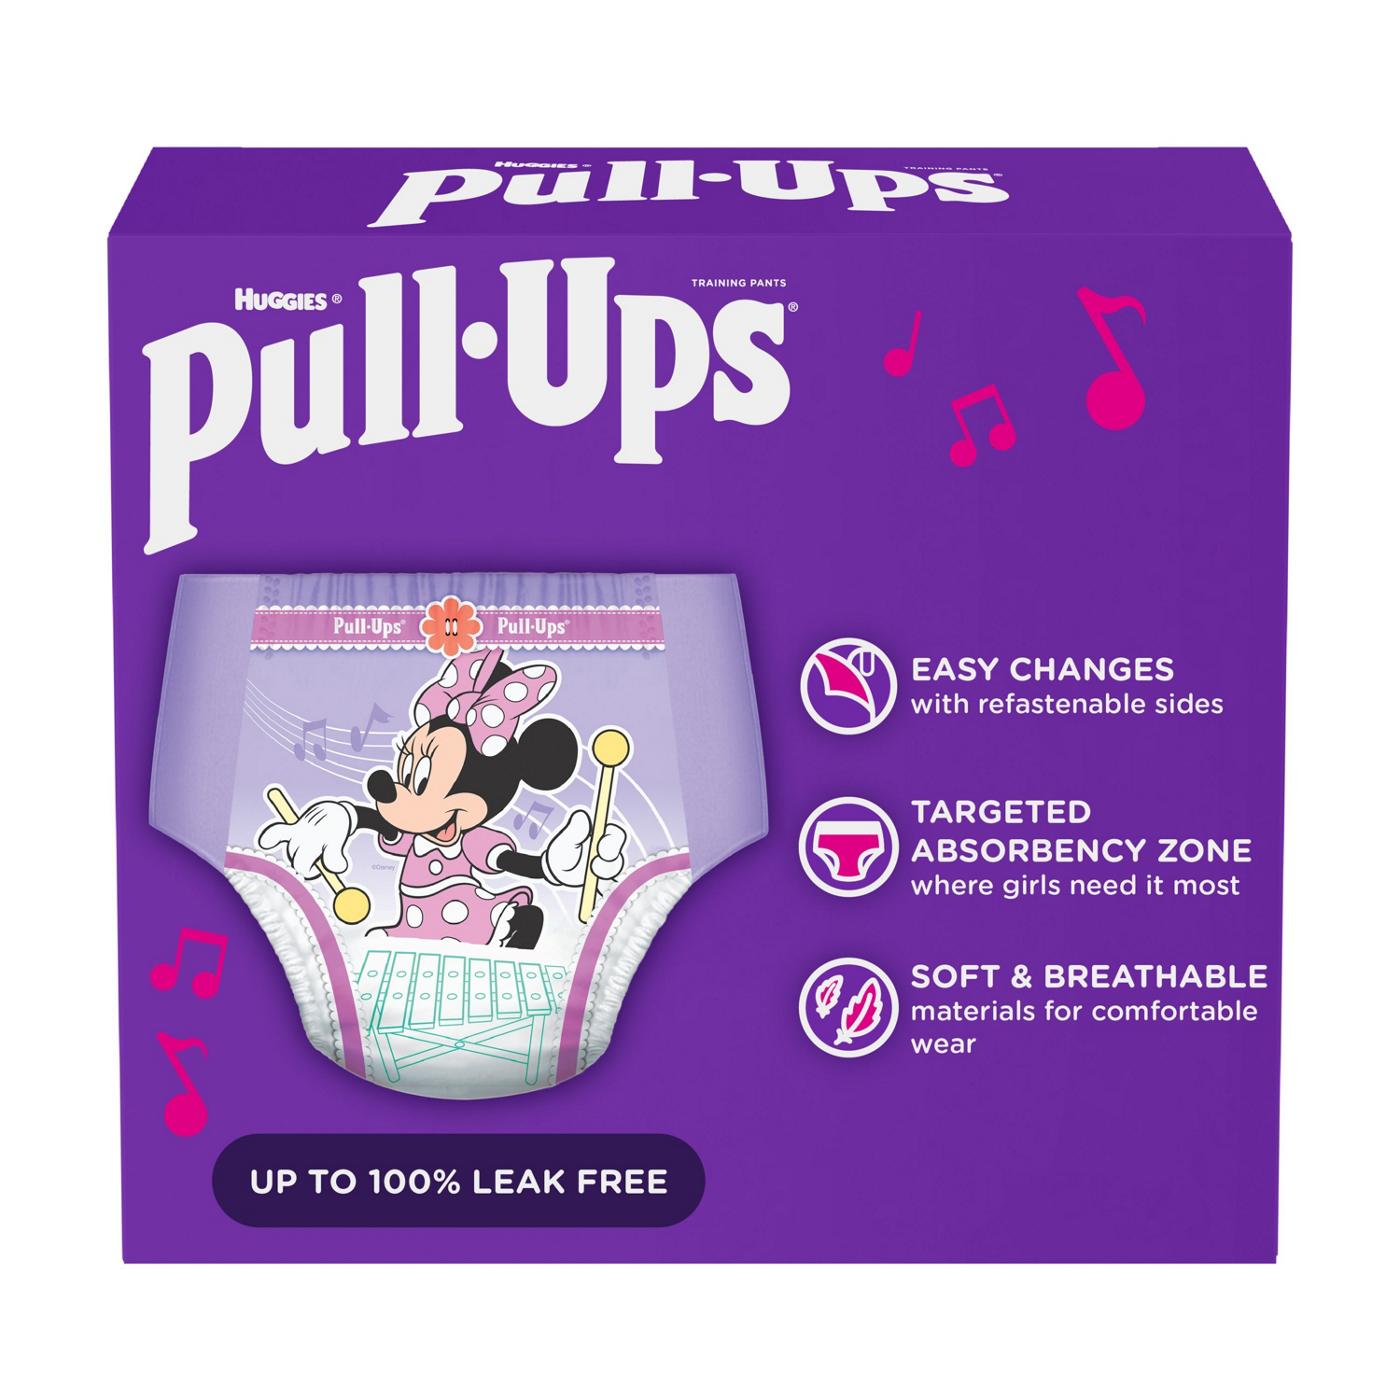 Baby Beehinds Pull Up Nappy / Training Pants - The Nappy Lady